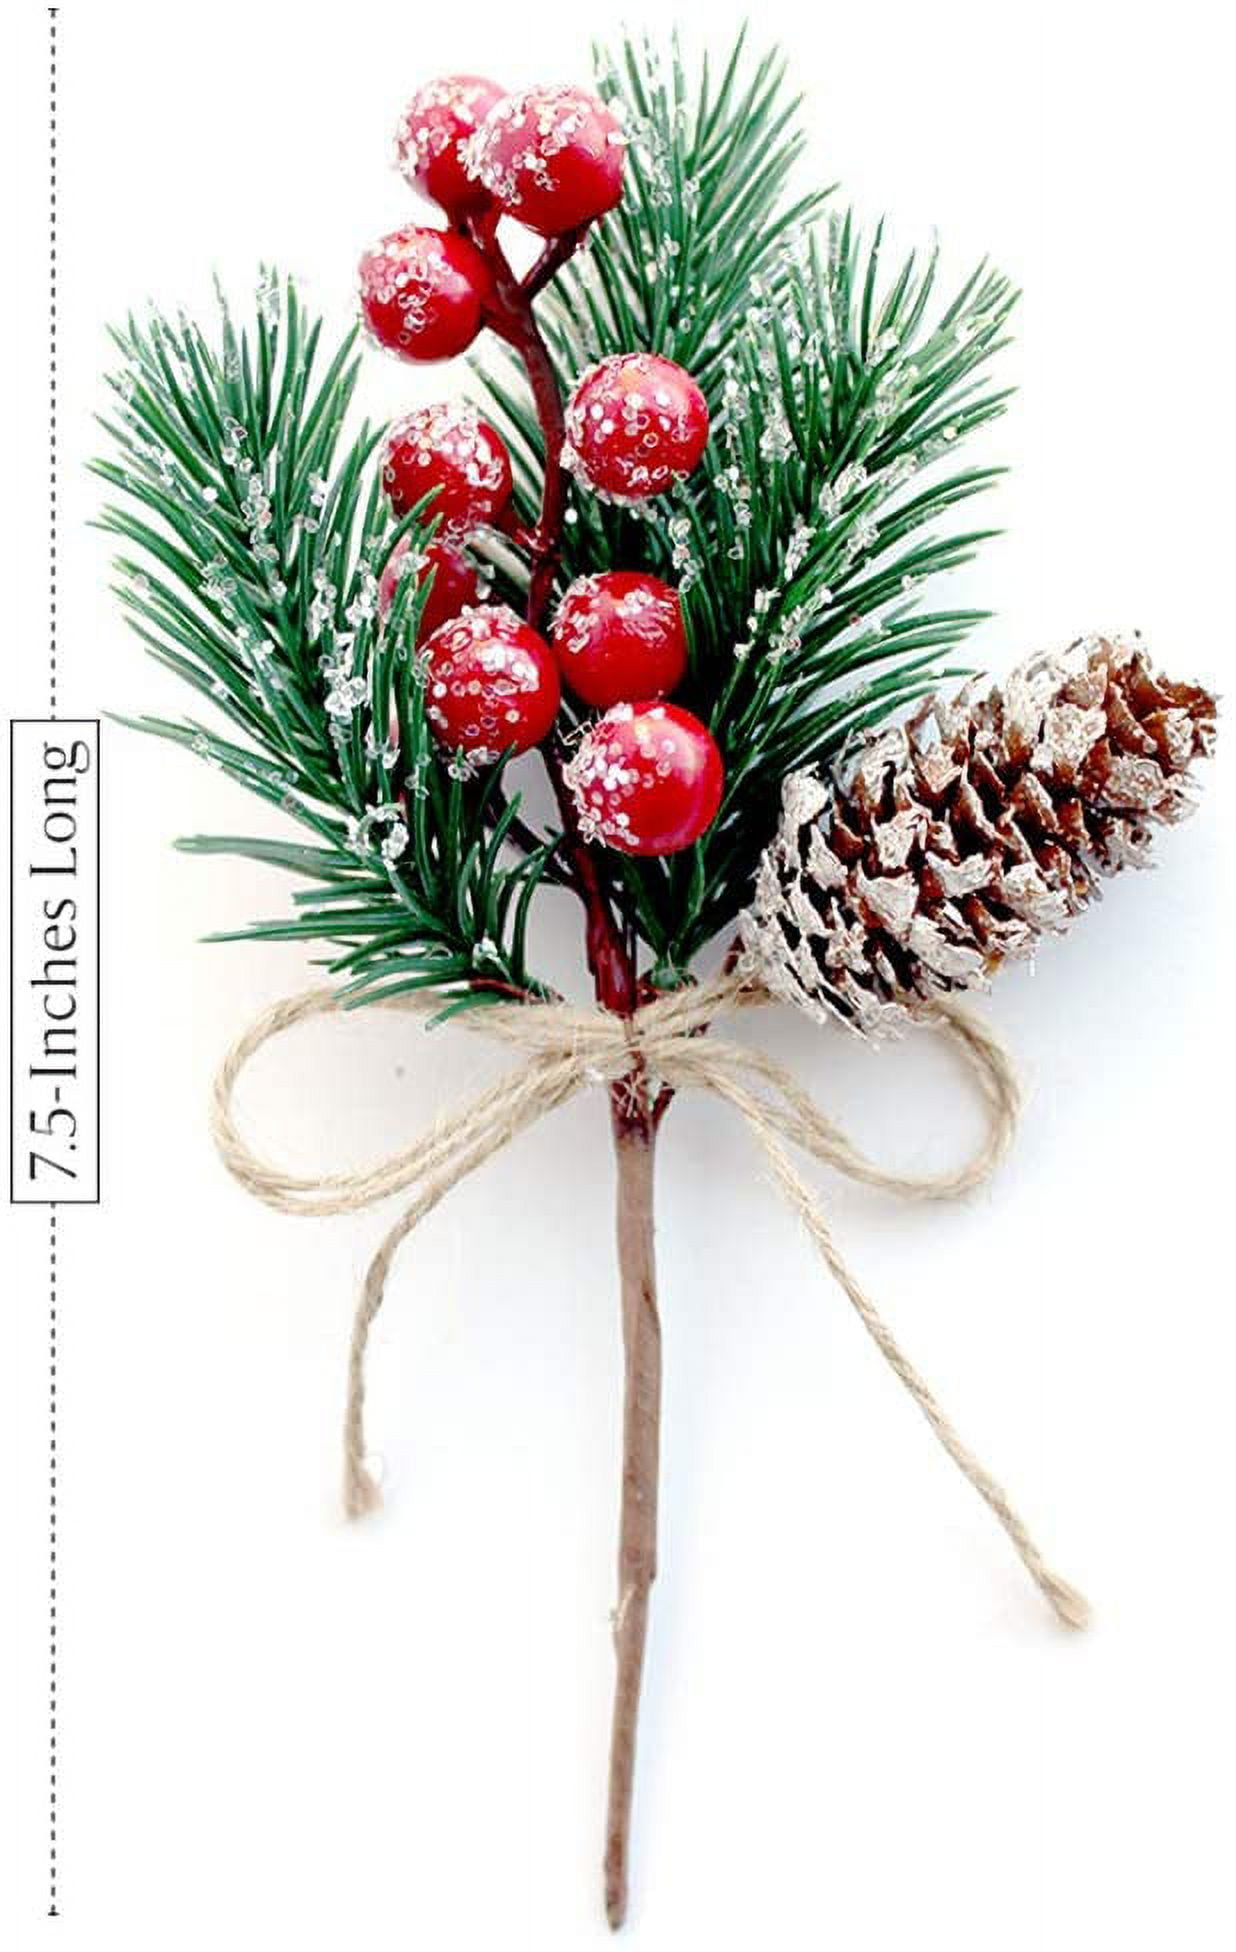  ZRSWV 10 PCS Christmas Pine Picks, Red Berries Stems Pine  Branches Artificial Pine Cones Branch Craft Wreath Pick Winter Floral Picks  Holly Stem for Decoration DIY Xmas Garland Crafts : Home